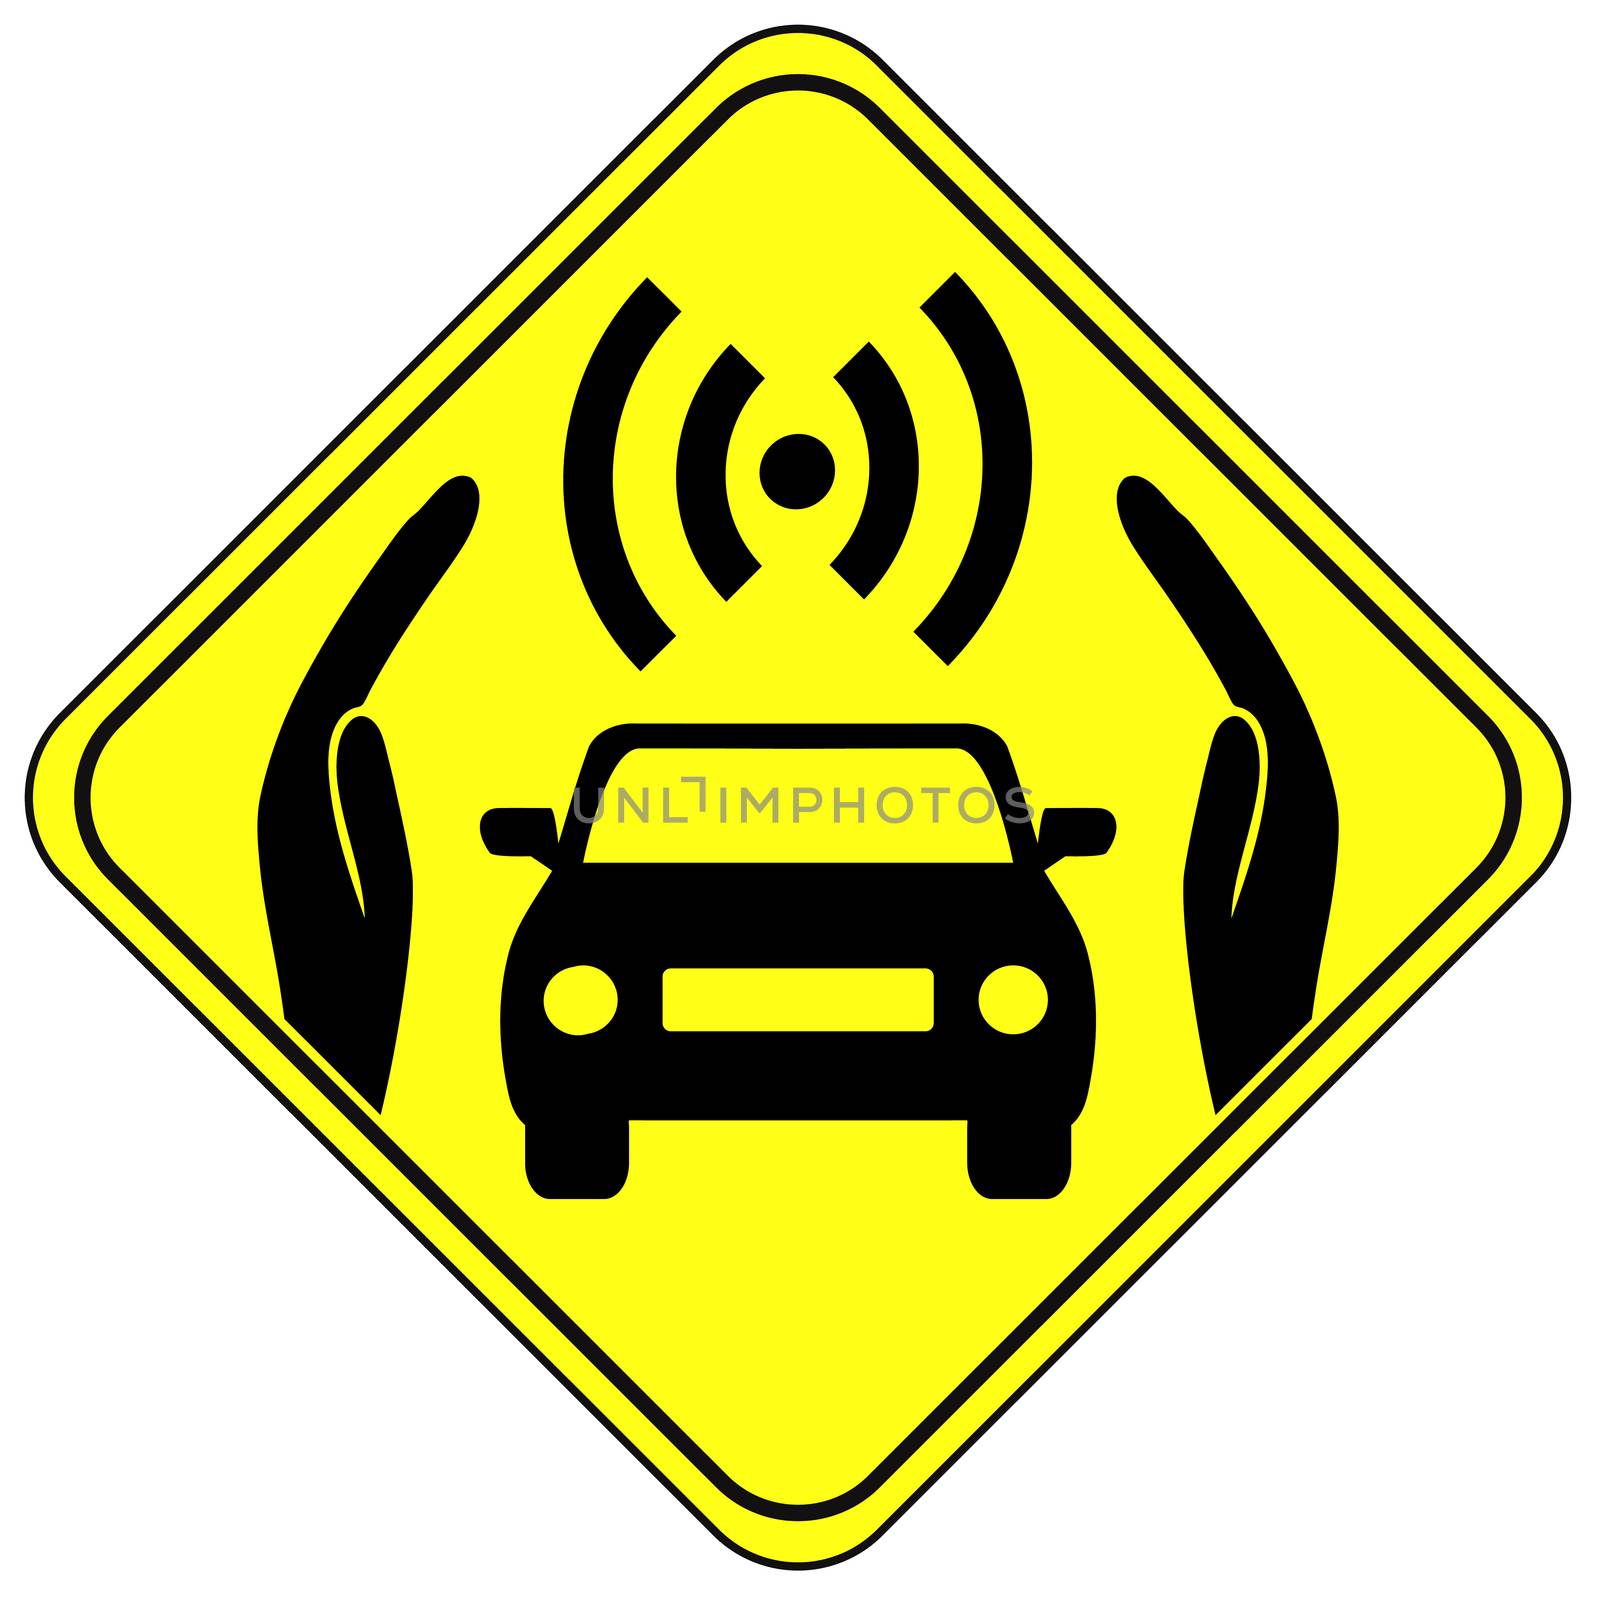 Concept sign for autonomous cars and driver safety